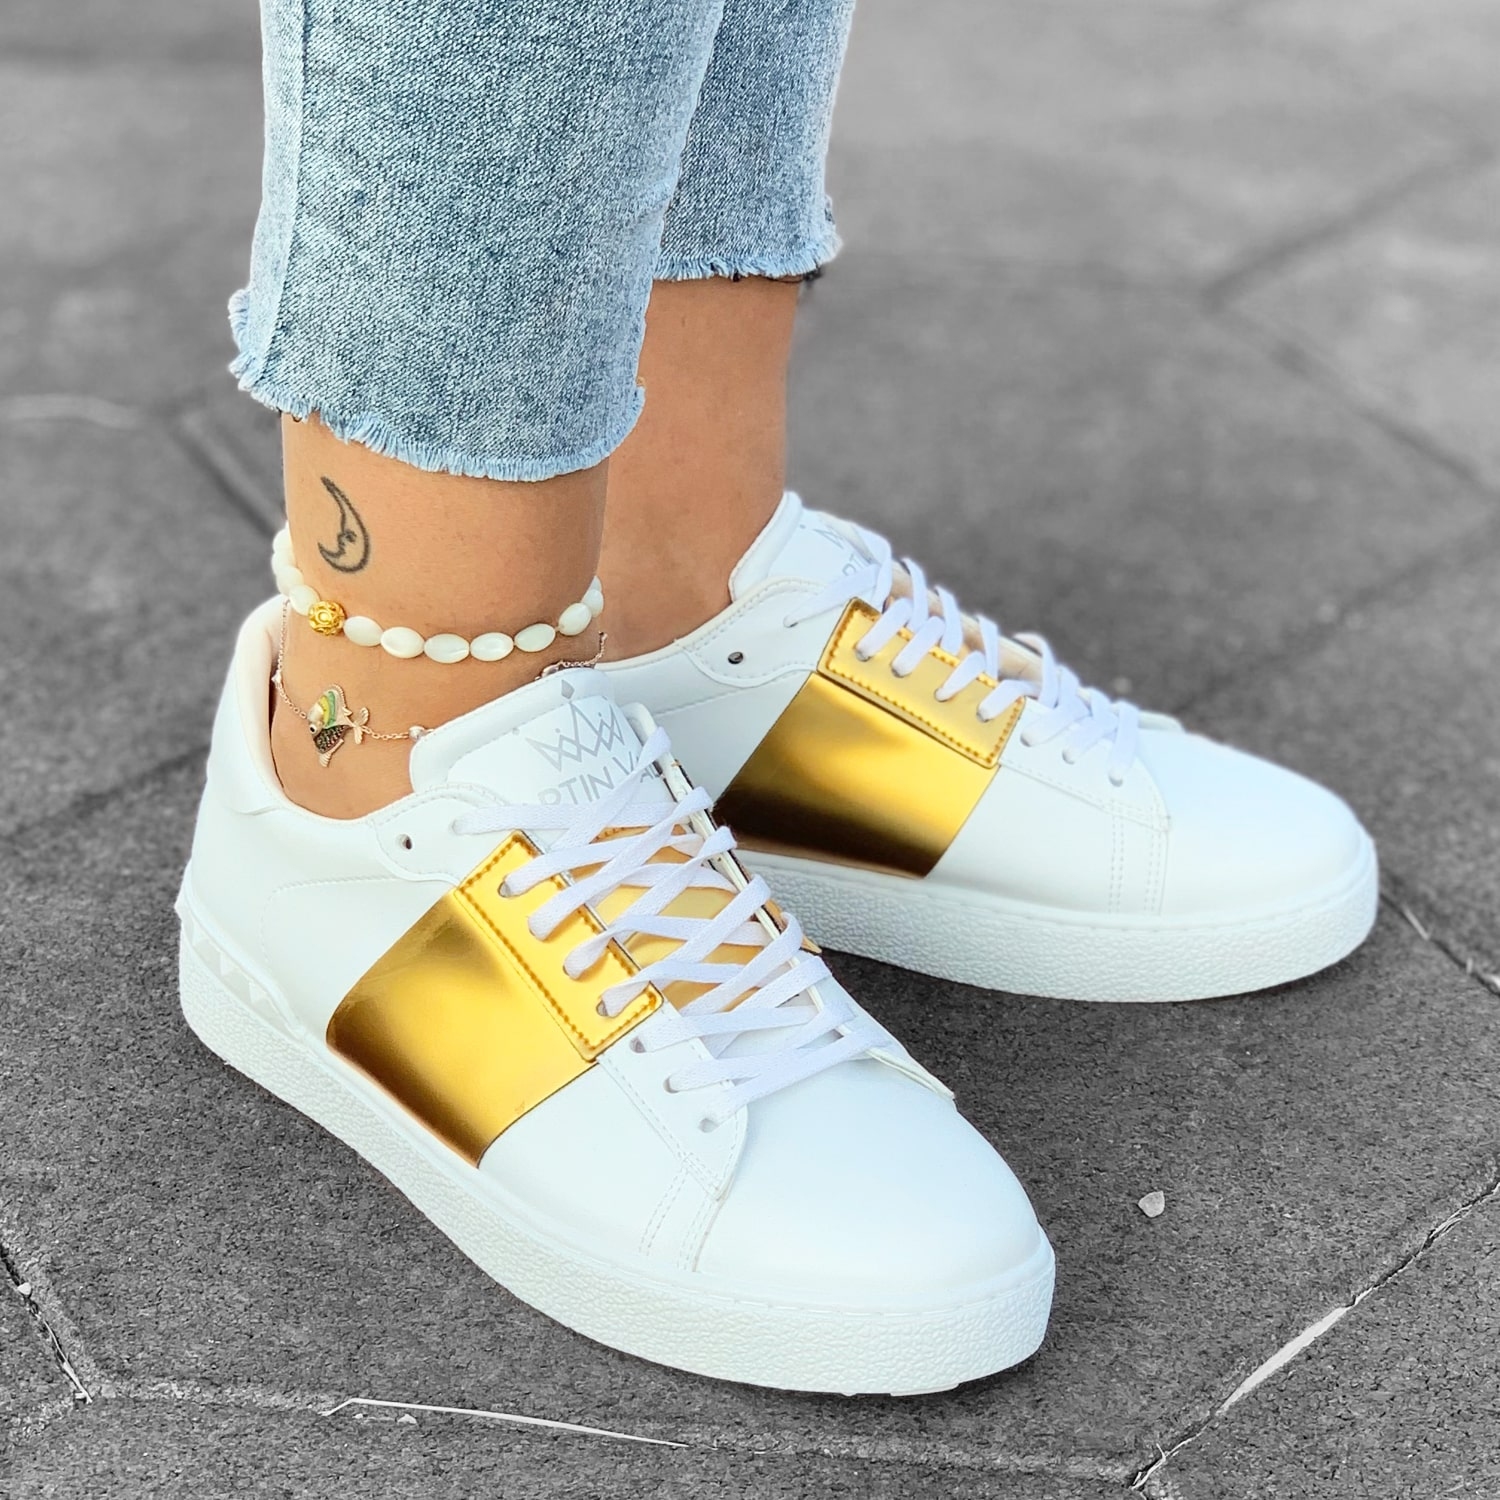 Martin Valen Women's Gold Striped Lace-up Sneakers White